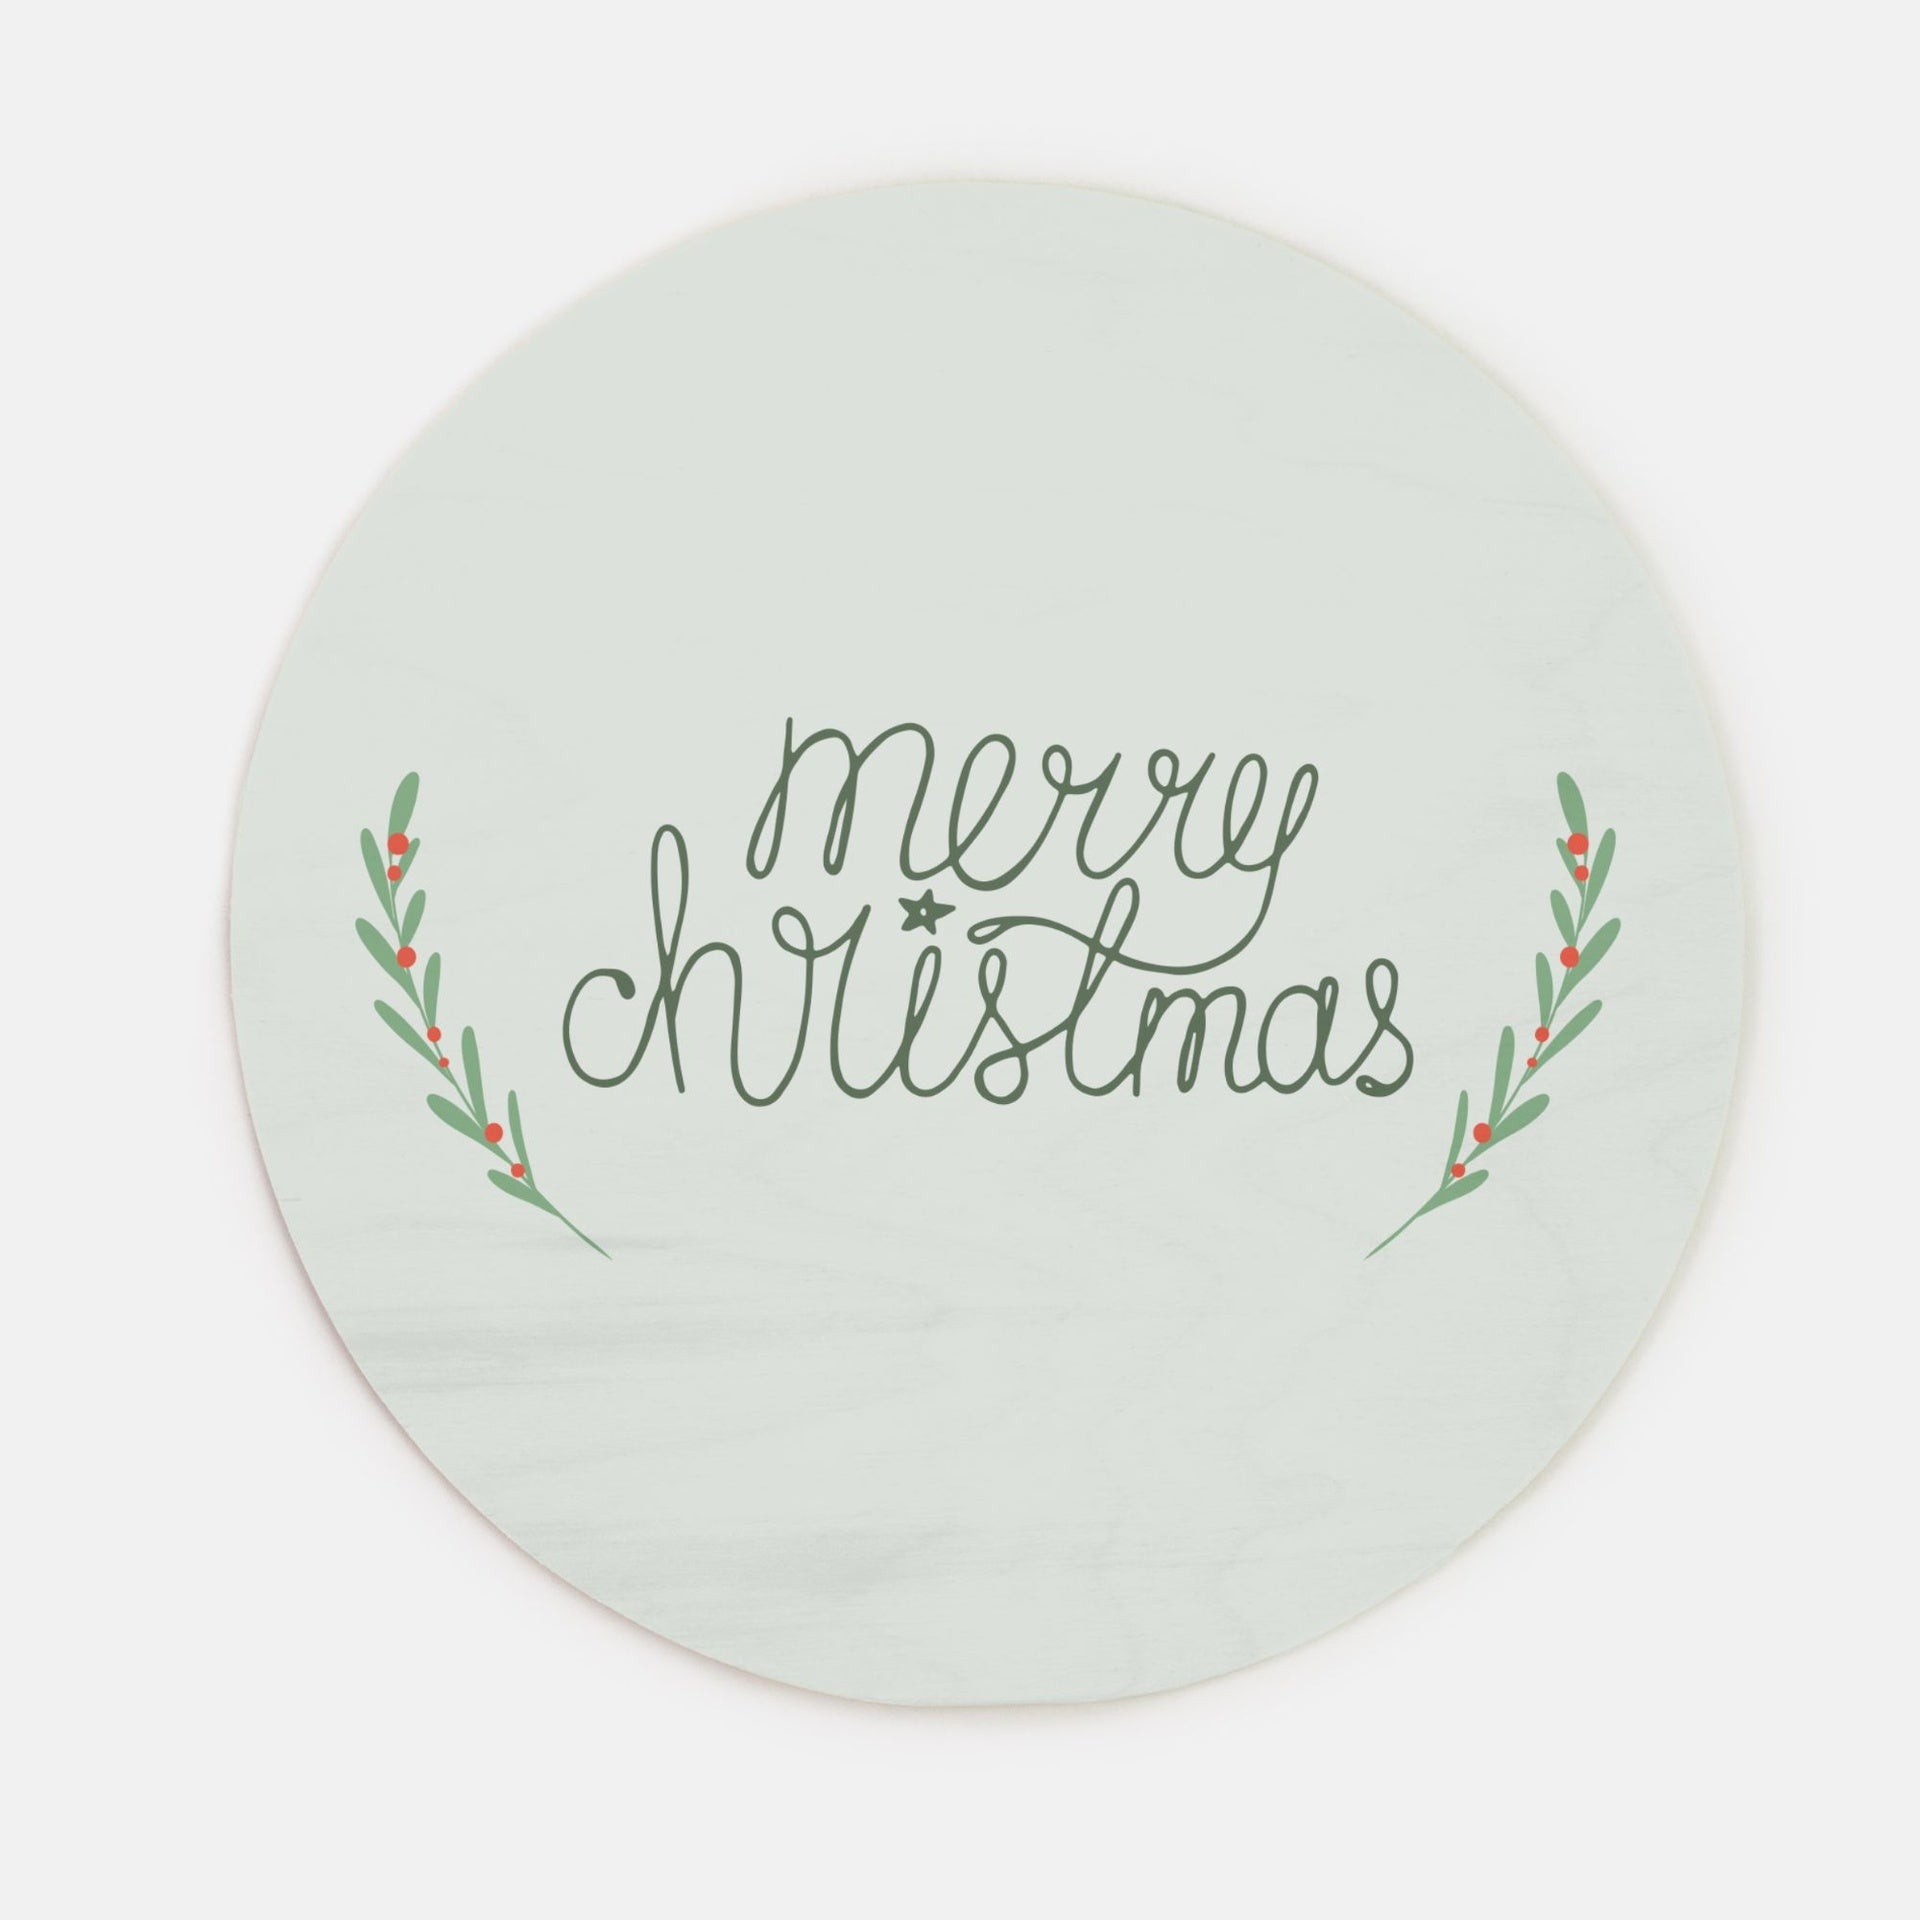 10" Green Round Wood Sign - Merry Christmas